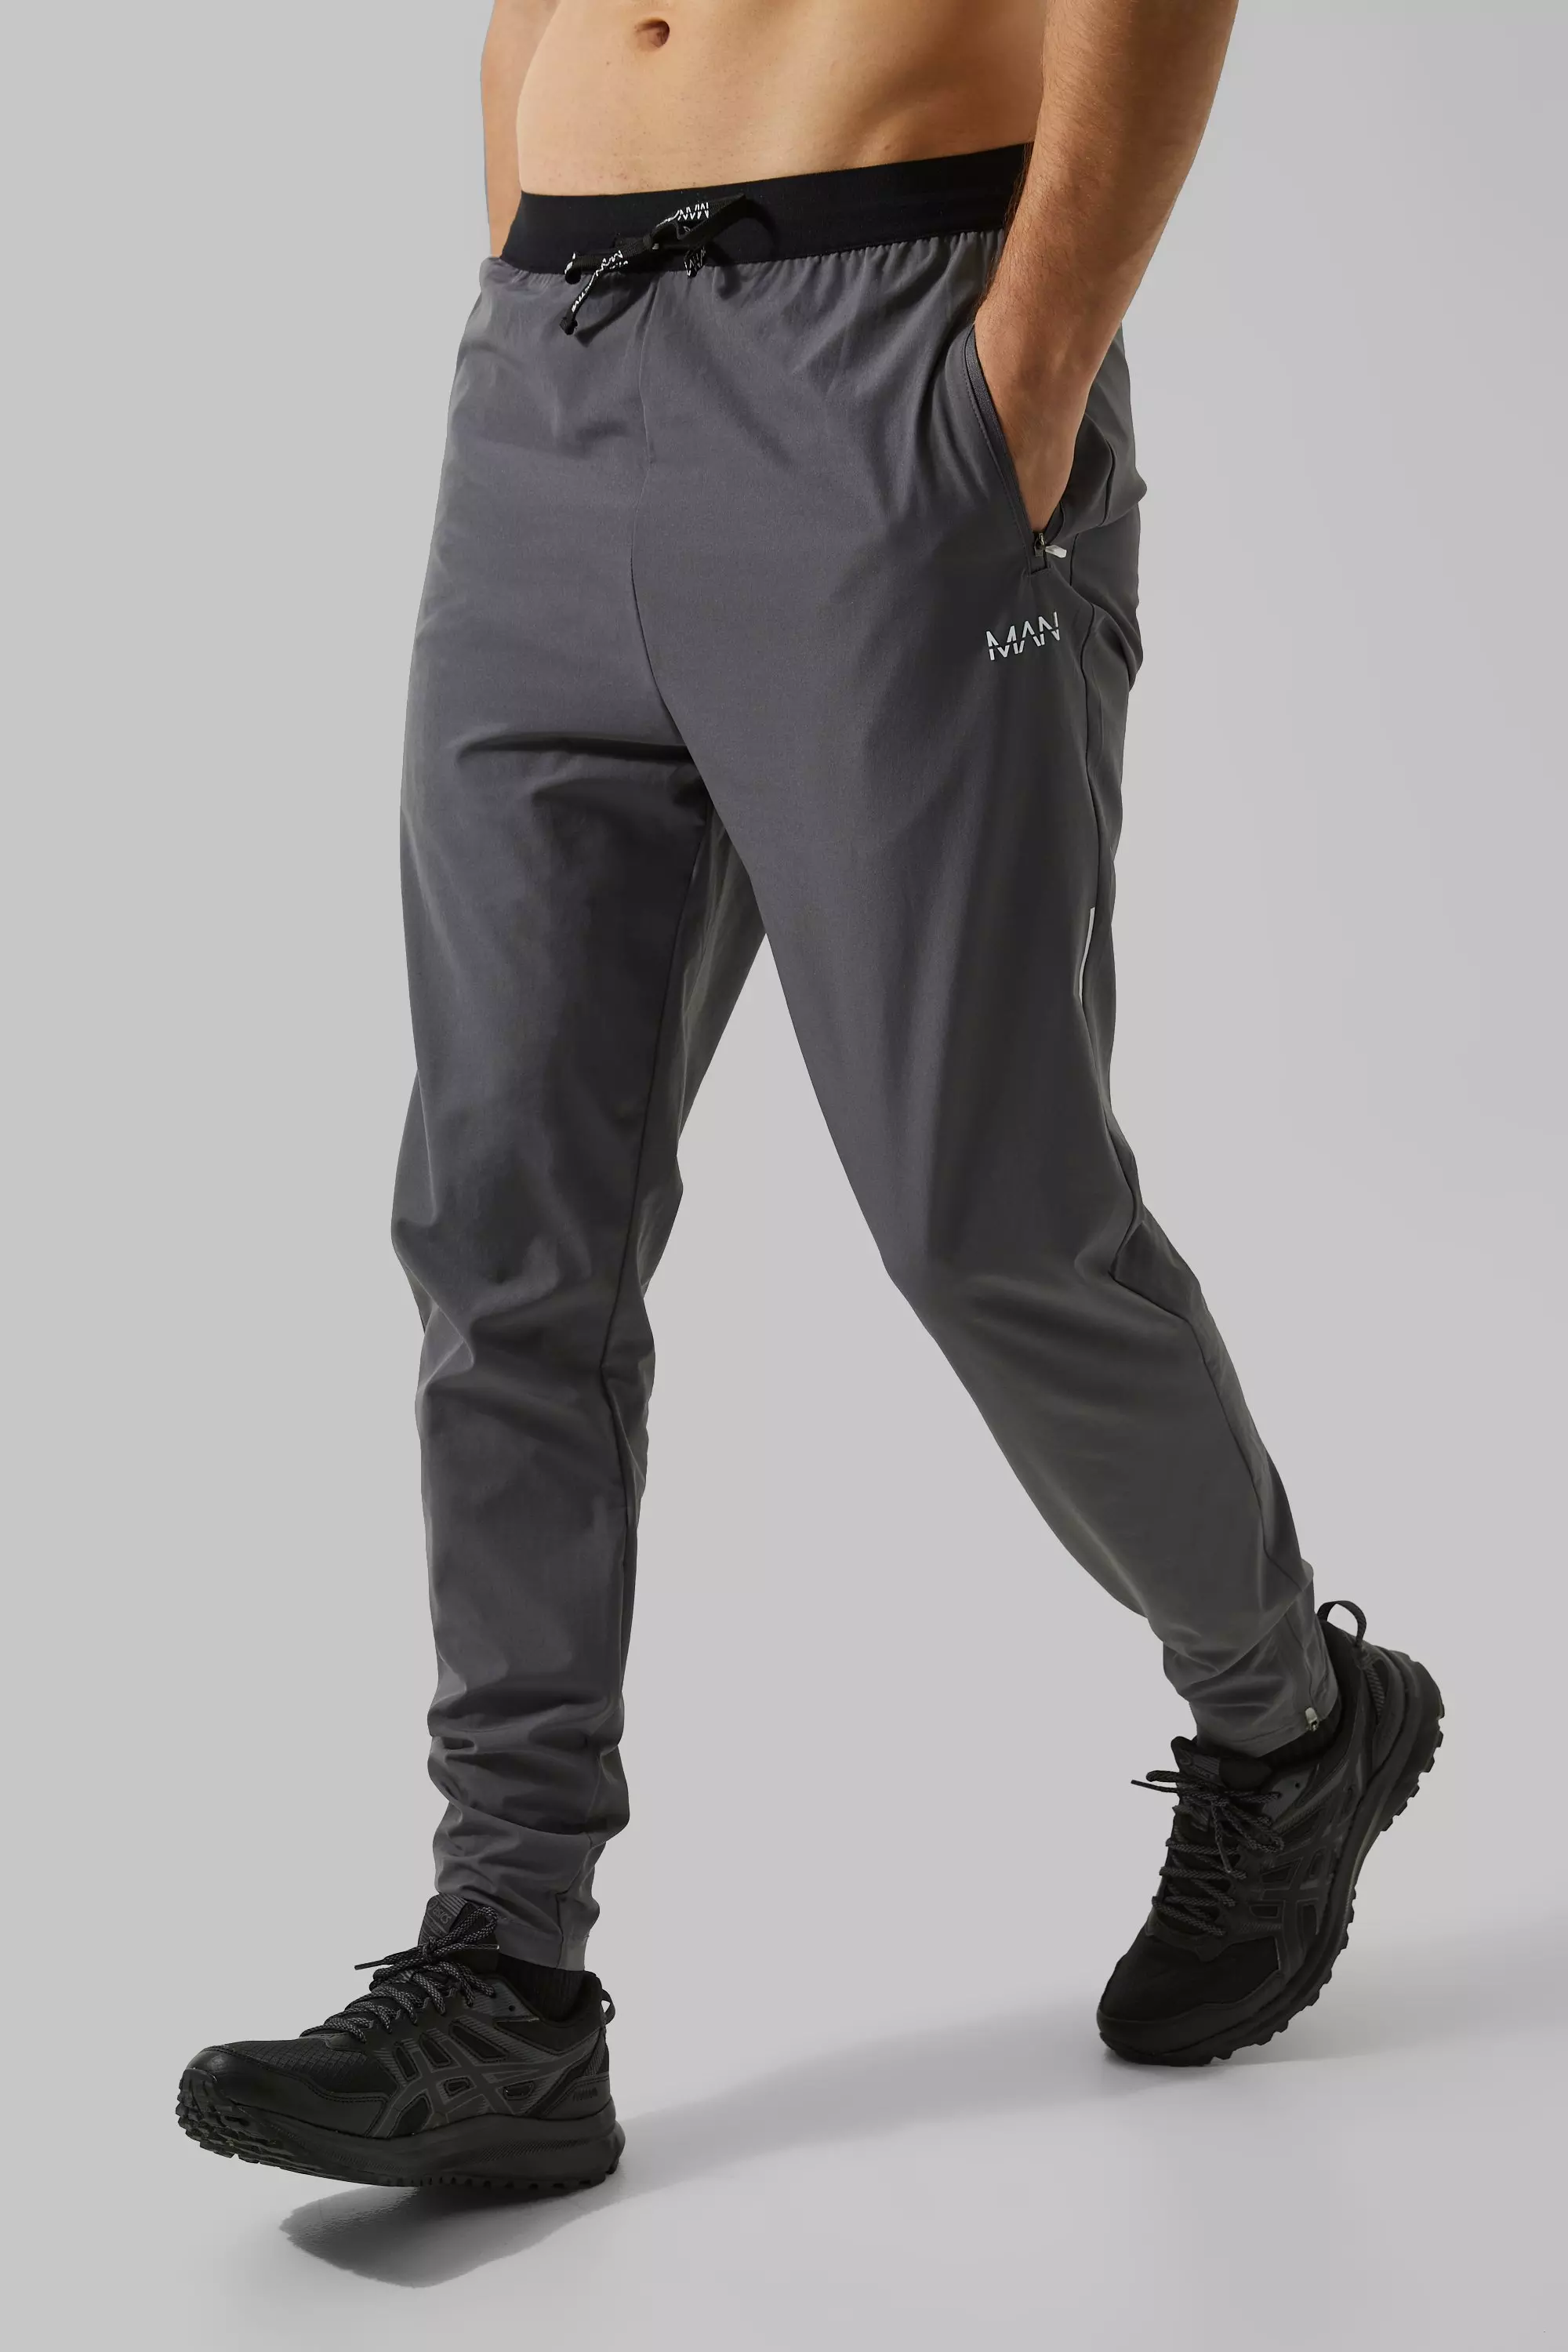 Tall Man Active Lightweight Performance Sweatpants Charcoal